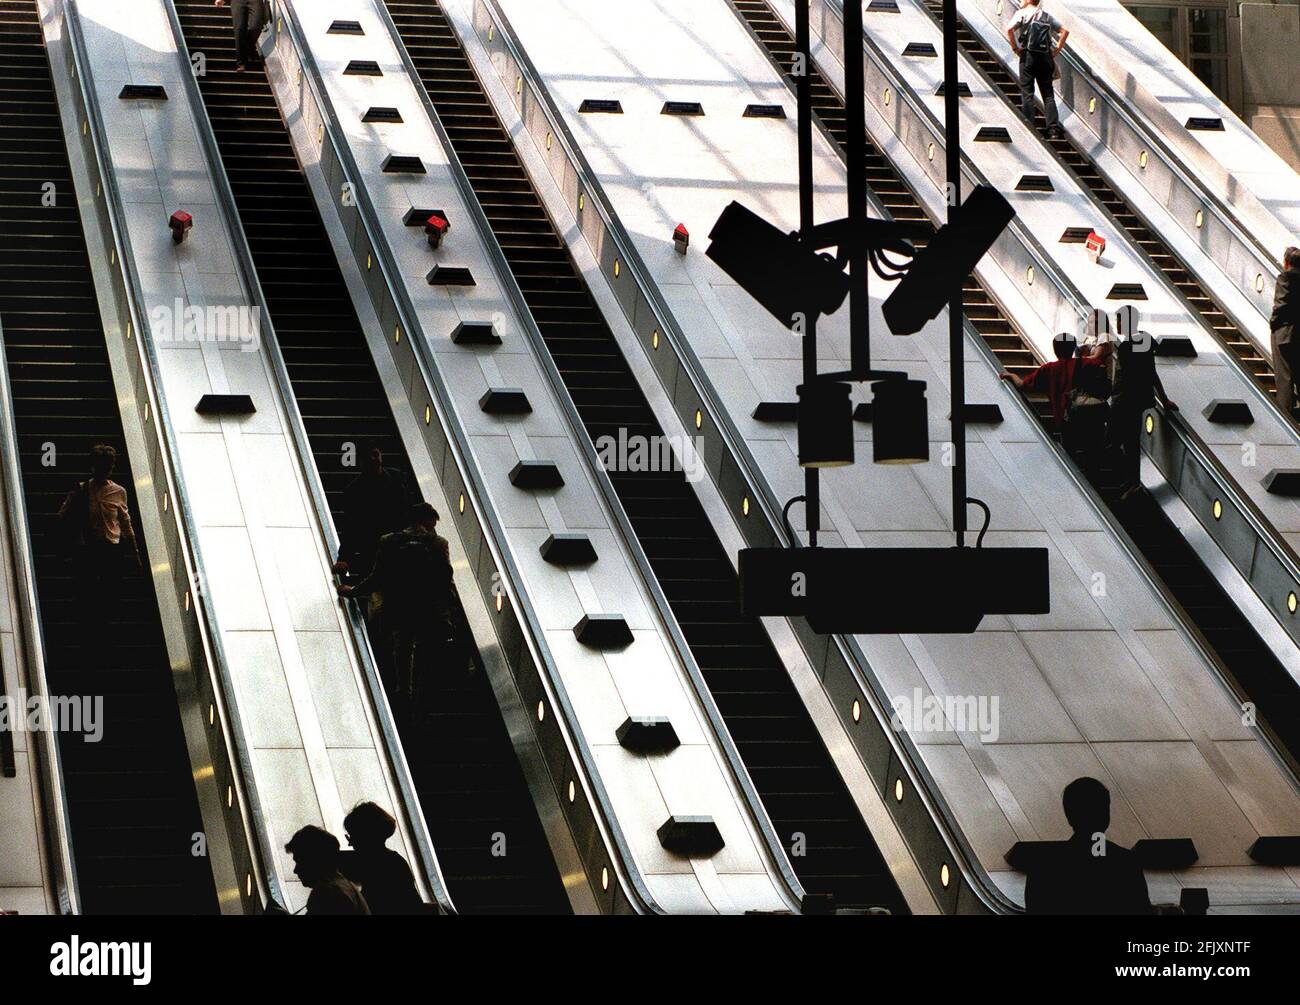 ESCALATORS AT CANARY WHARF STATION JUNE 2000ON THE JUBILEE LINE EXTENSION Stock Photo